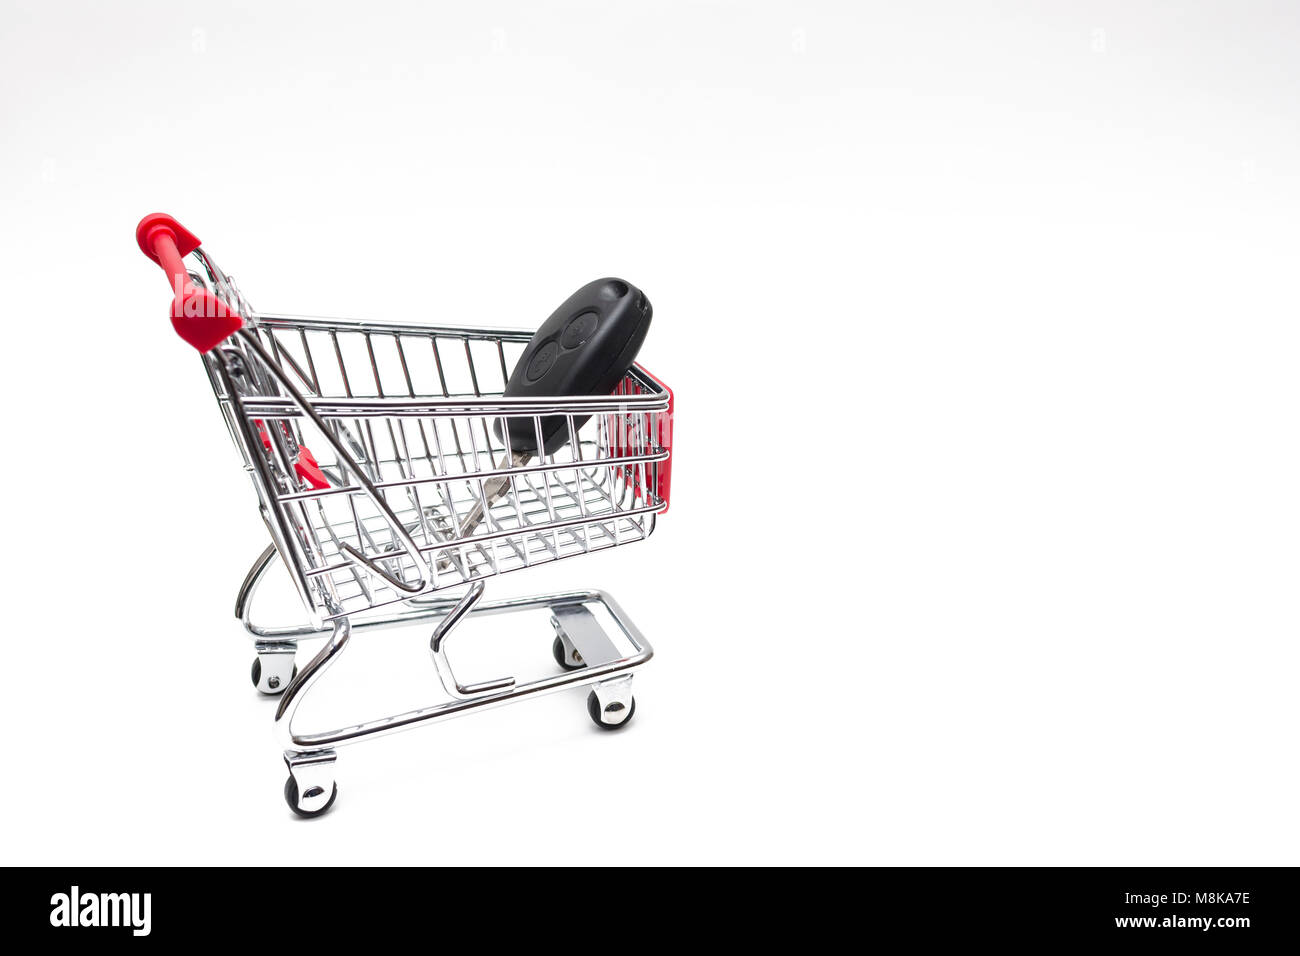 Buying a car from carshop, Car in shopping cart, shoping cart isolated on white background Stock Photo